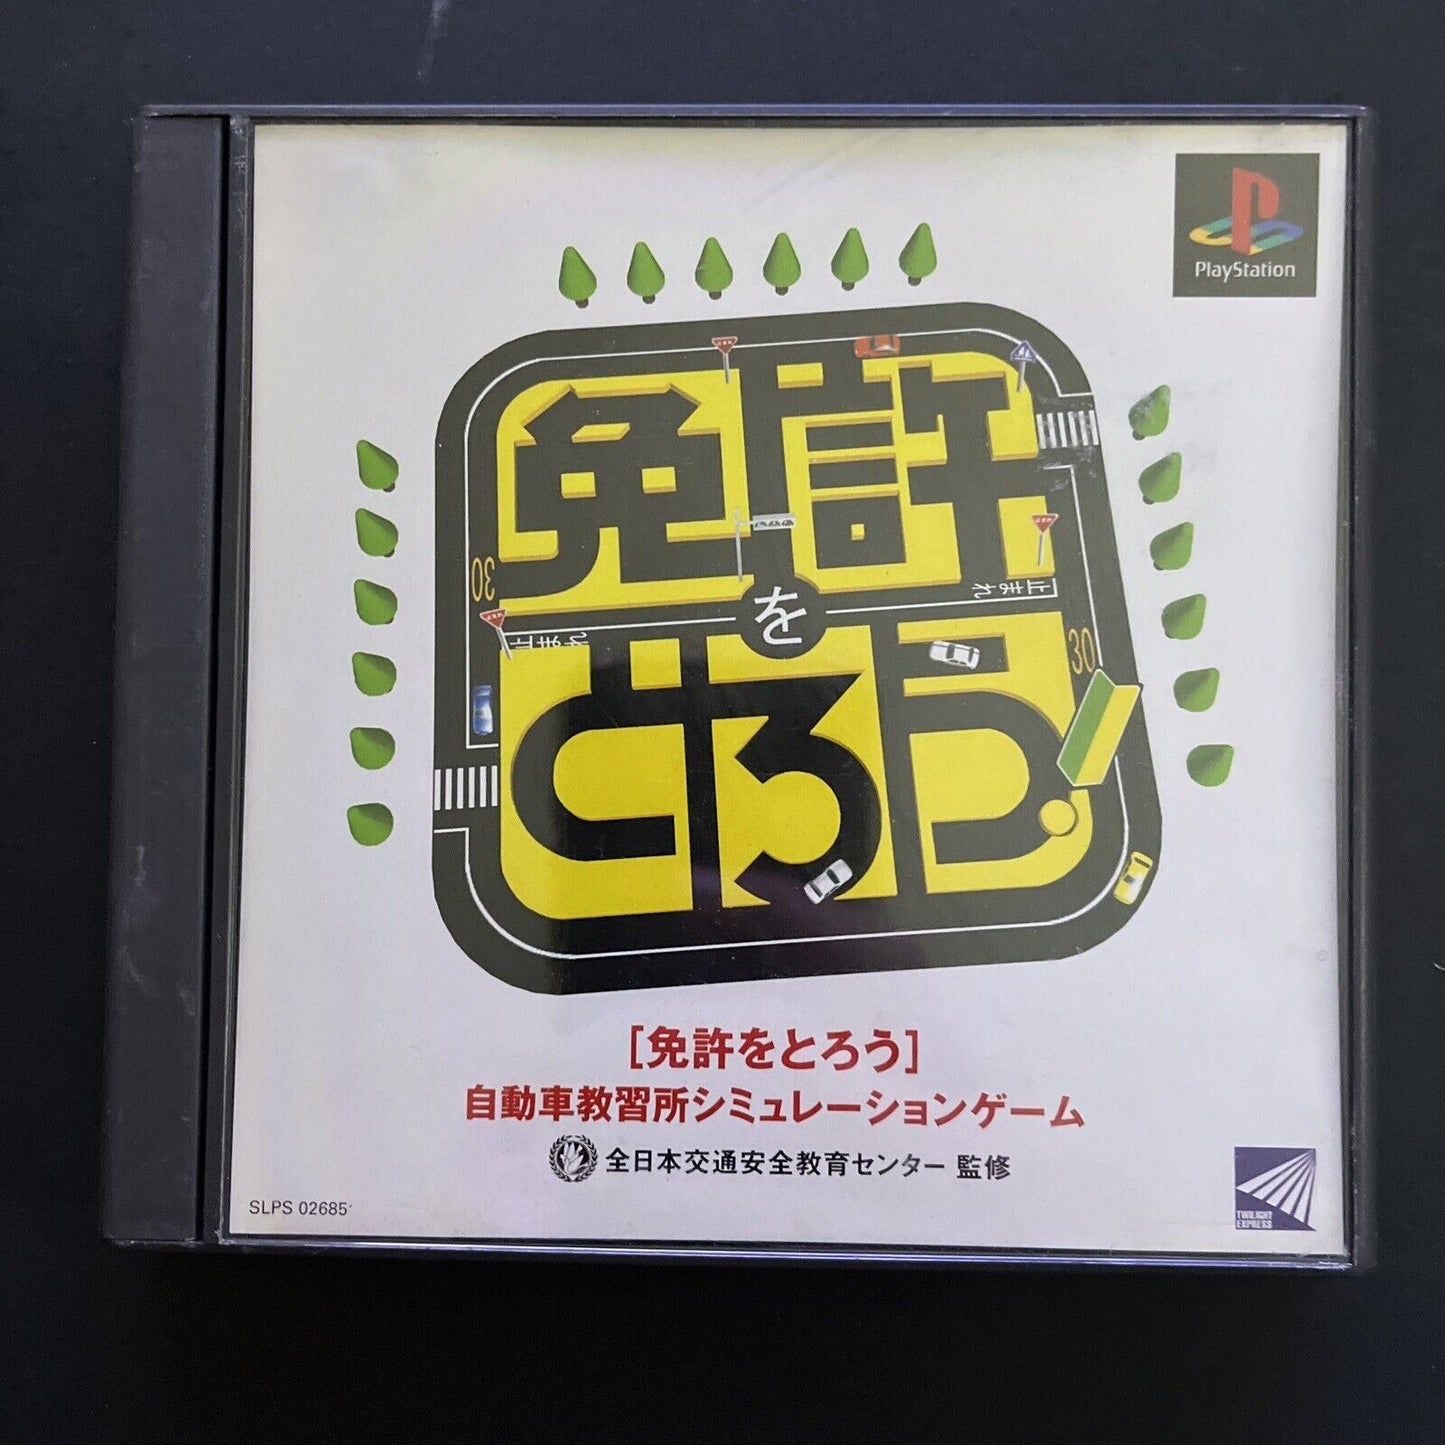 Get The License - Sony PlayStation PS1 NTSC-J JAPAN 2000 Car Simulation Game